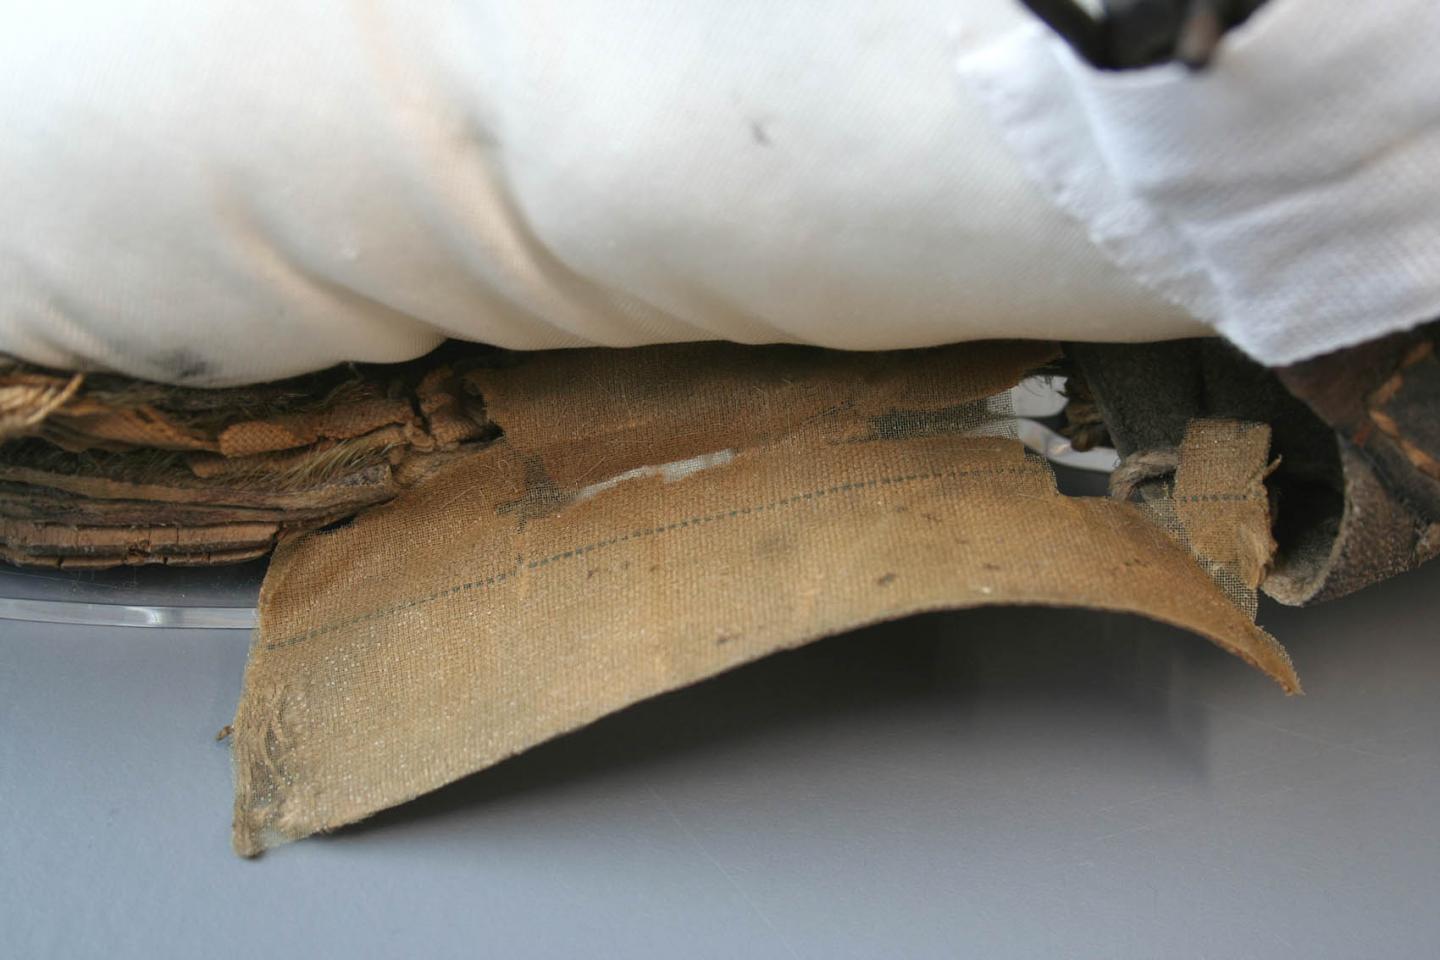 The canvas side of the right overshoe was still vulnerable